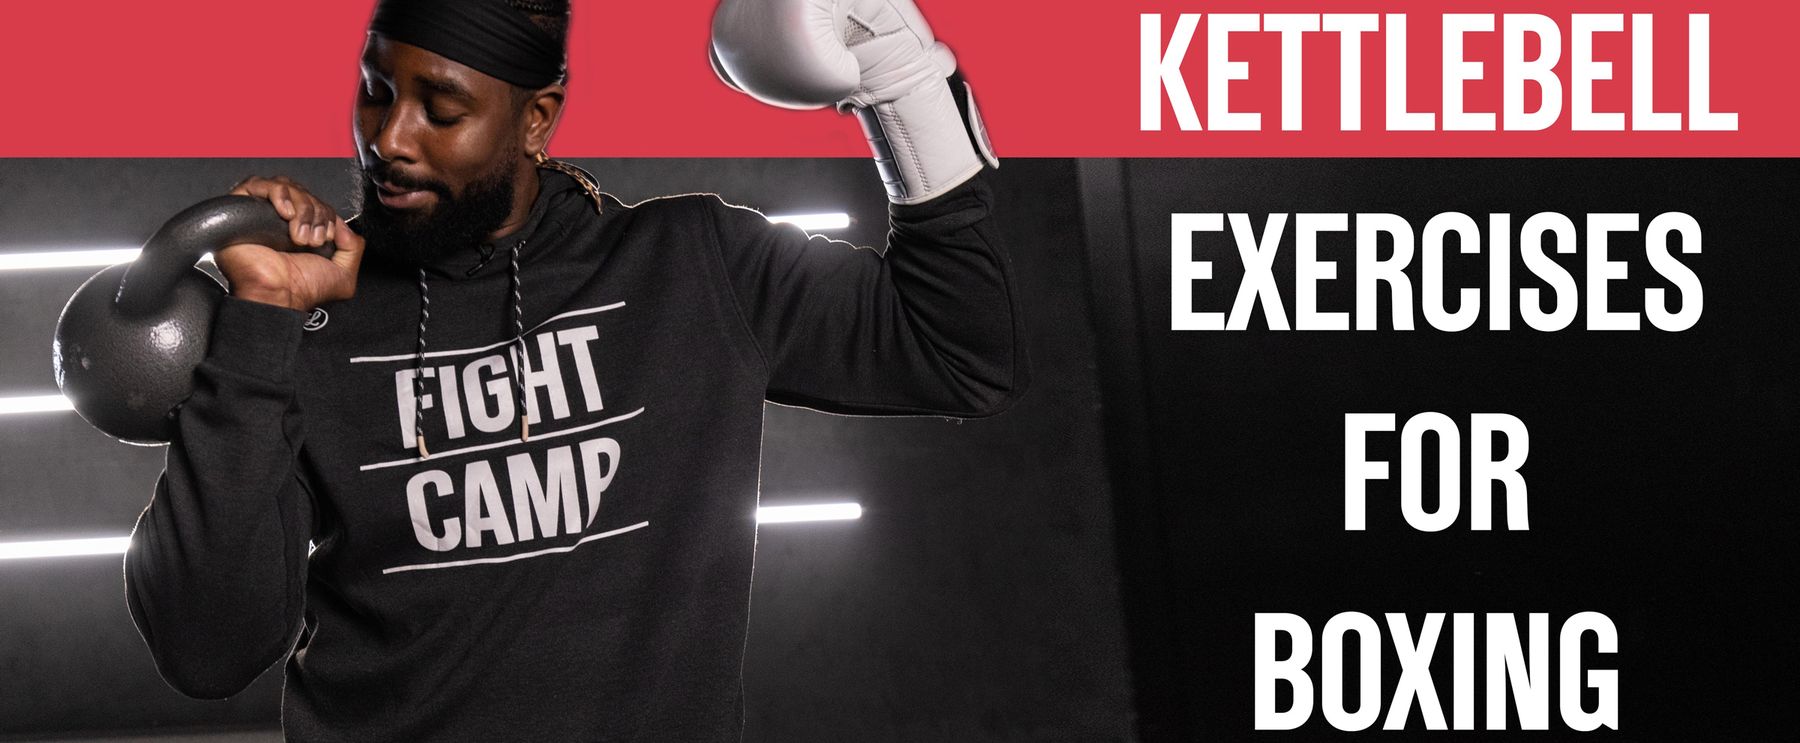 FightCamp - Best Kettlebell Exercises for Fighters